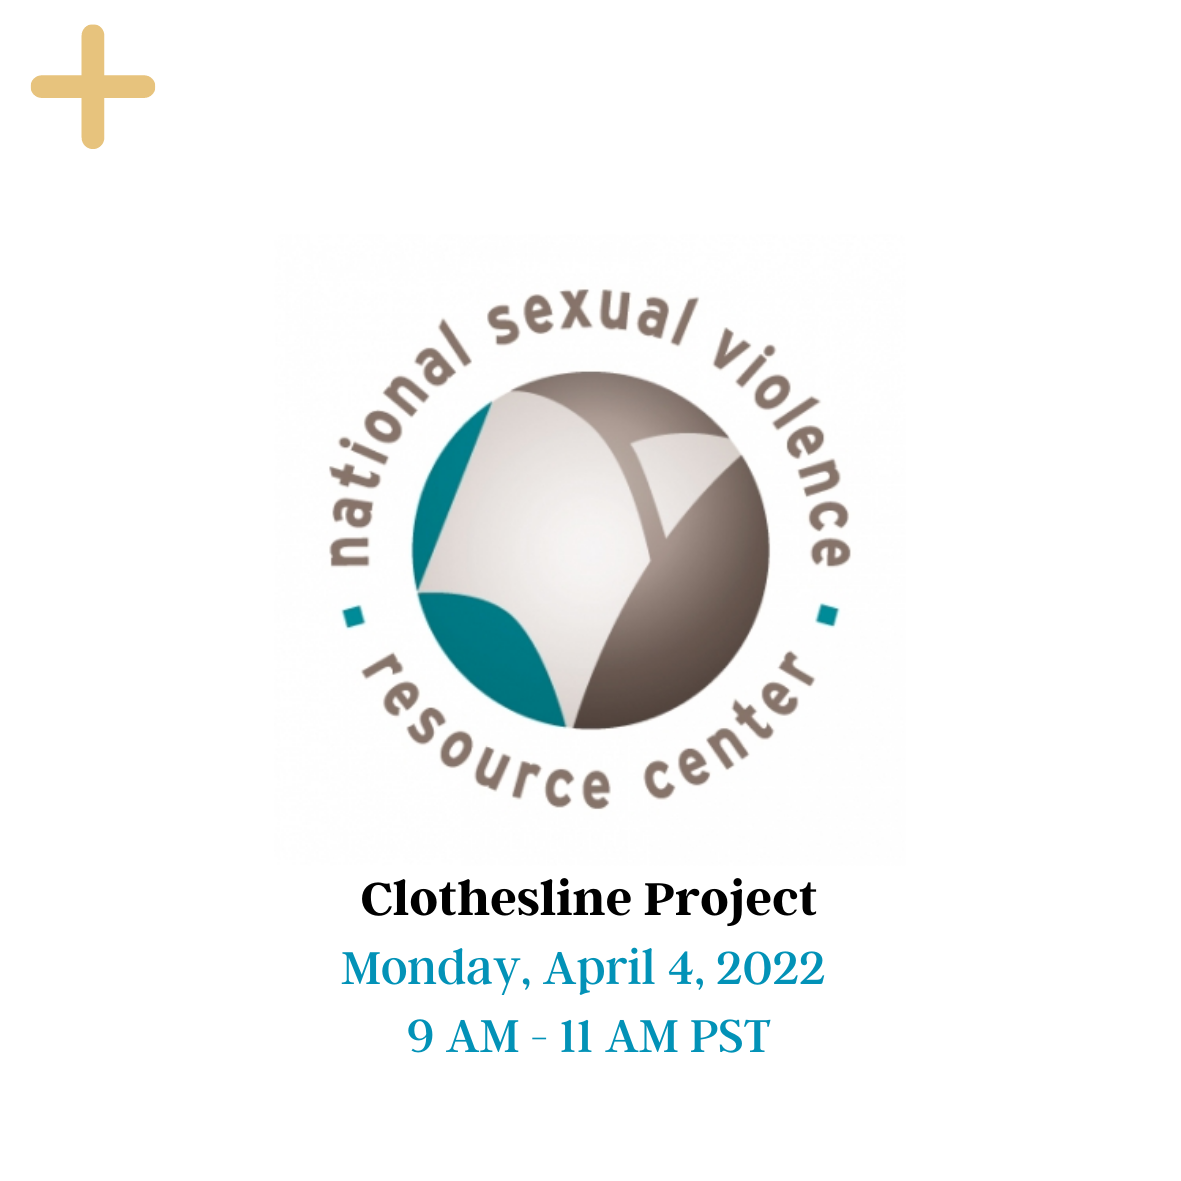 Clothesline project cover page with the National Sexual Violence Resource Center logo displayed. The yellow button on the top can be clicked and will provide more information. The picture has date at the bottom: Monday, April 4, 2022, 9 AM - 11 AM PST